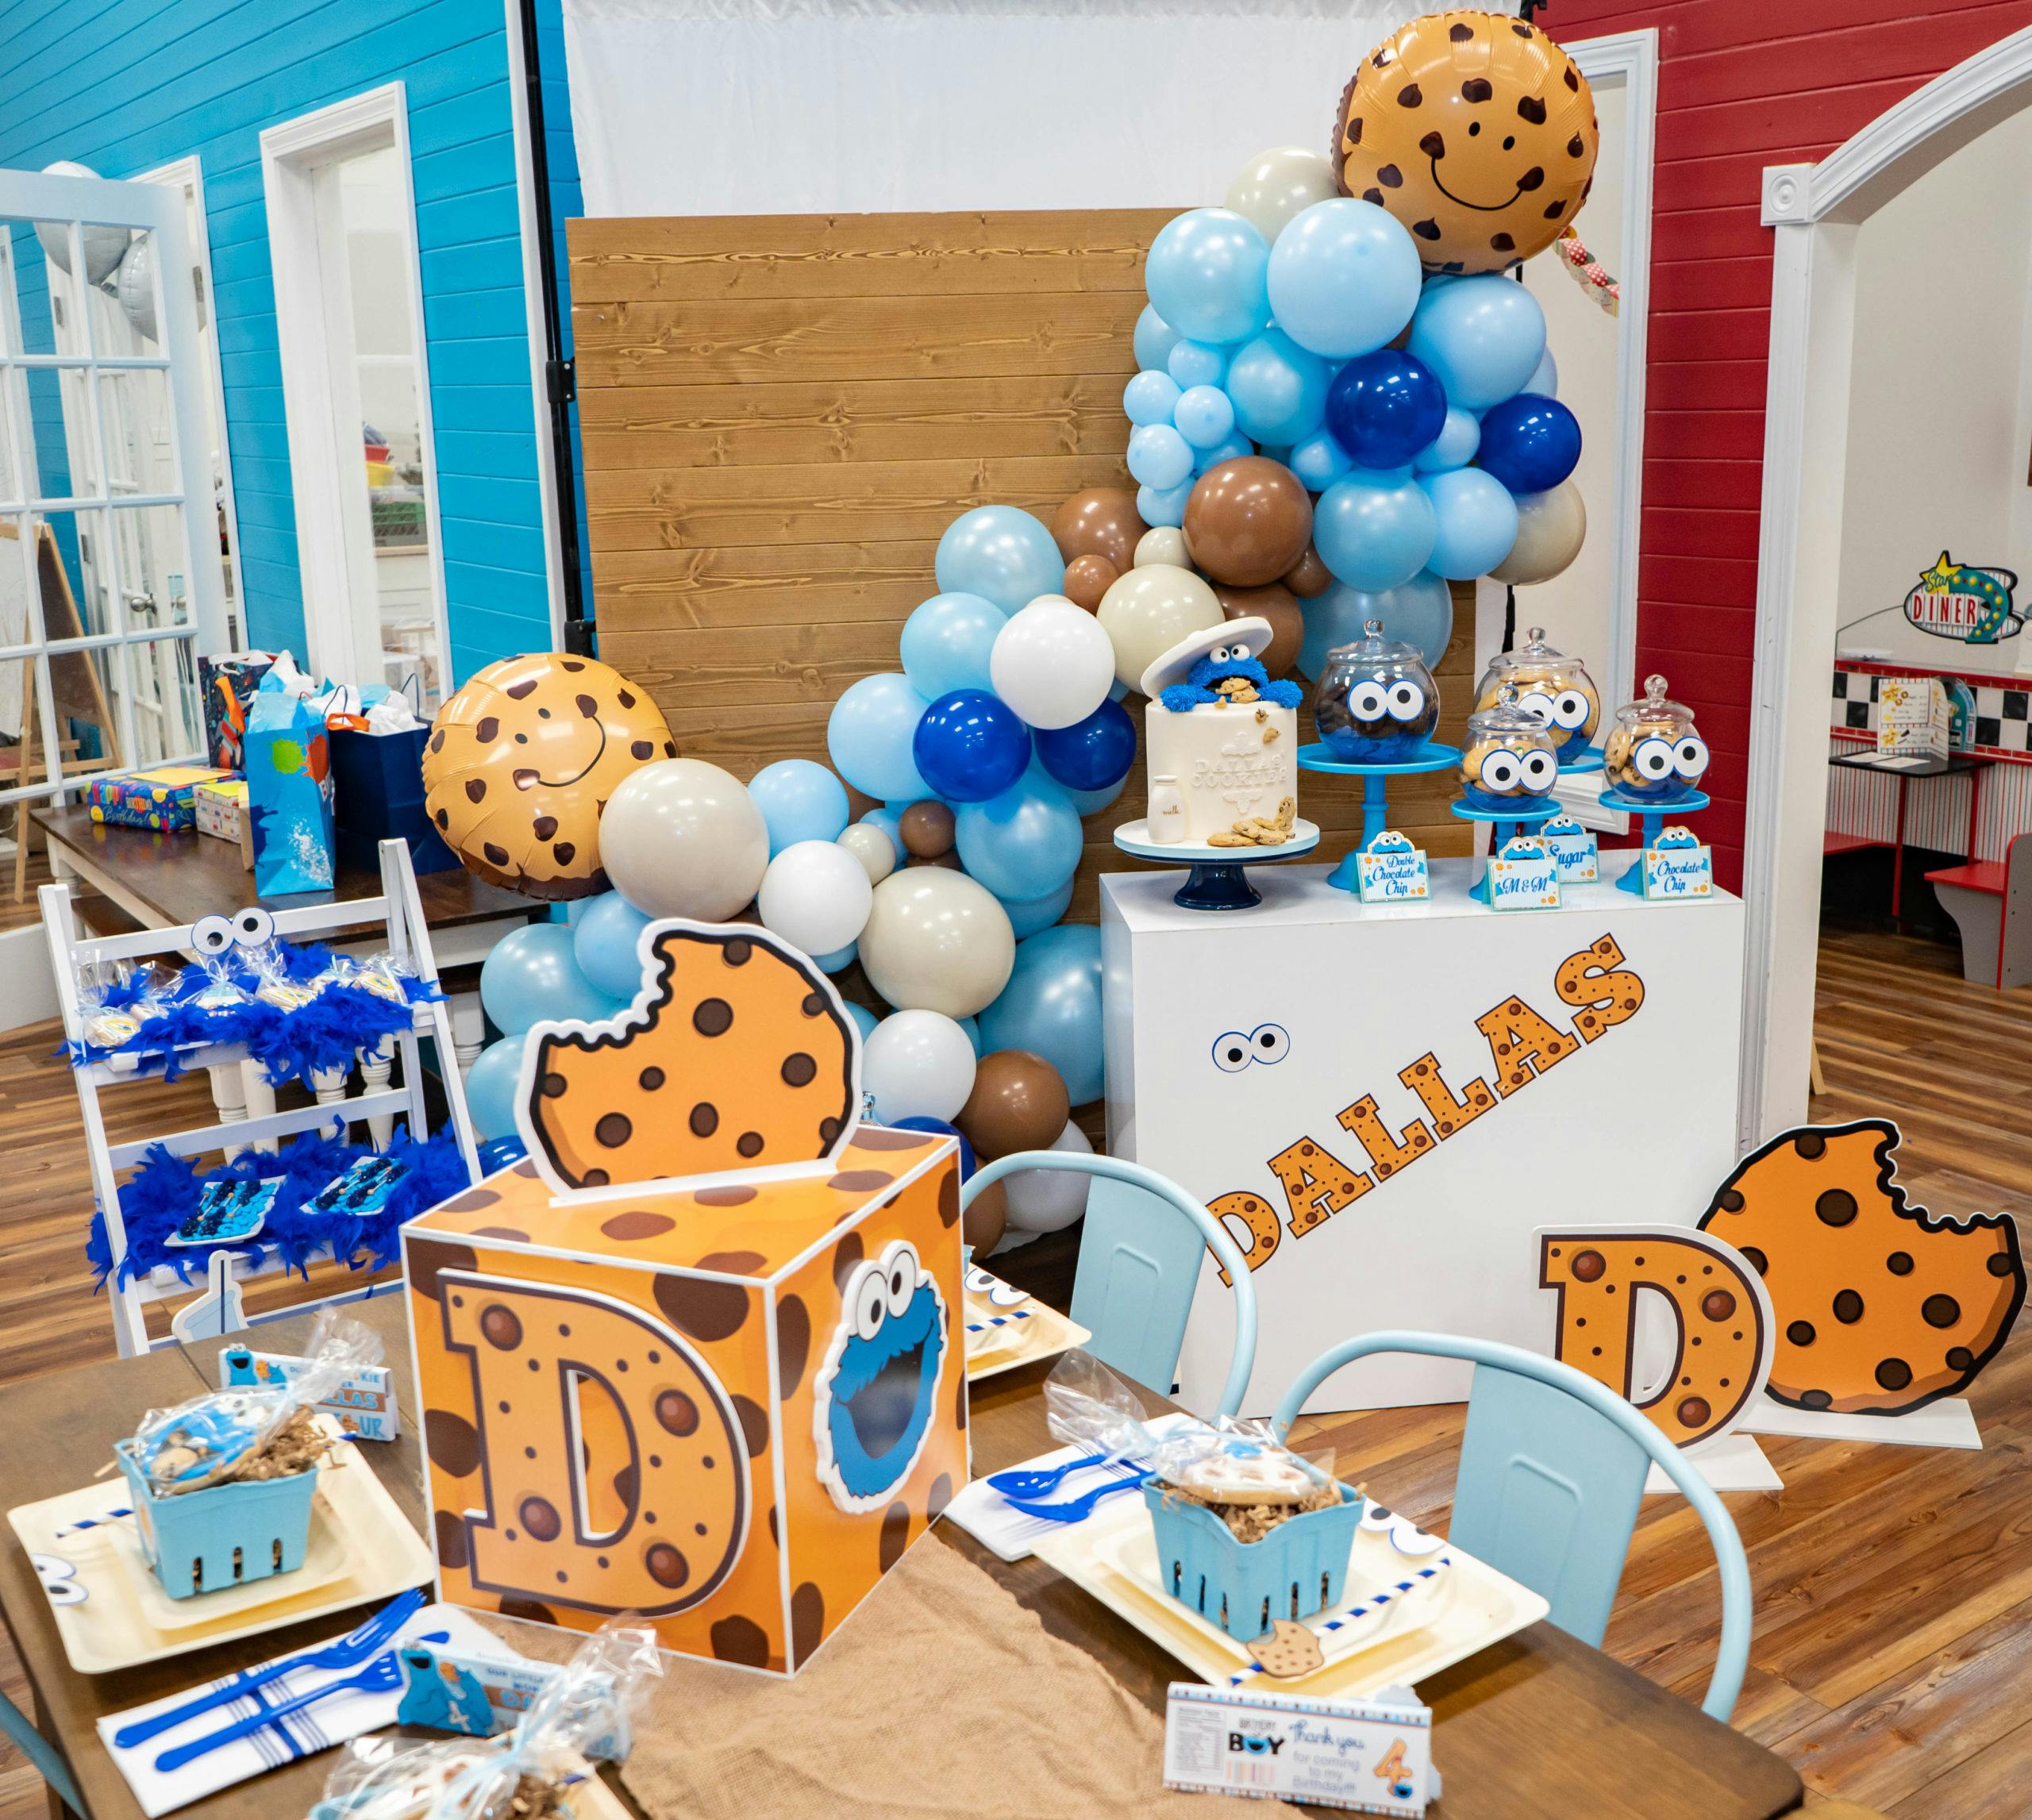 Kids Cookie Monster Themed 4th Birthday Party with Cookie Monster Cake and White Tan and Blue Balloons and Decorations | PartySlate